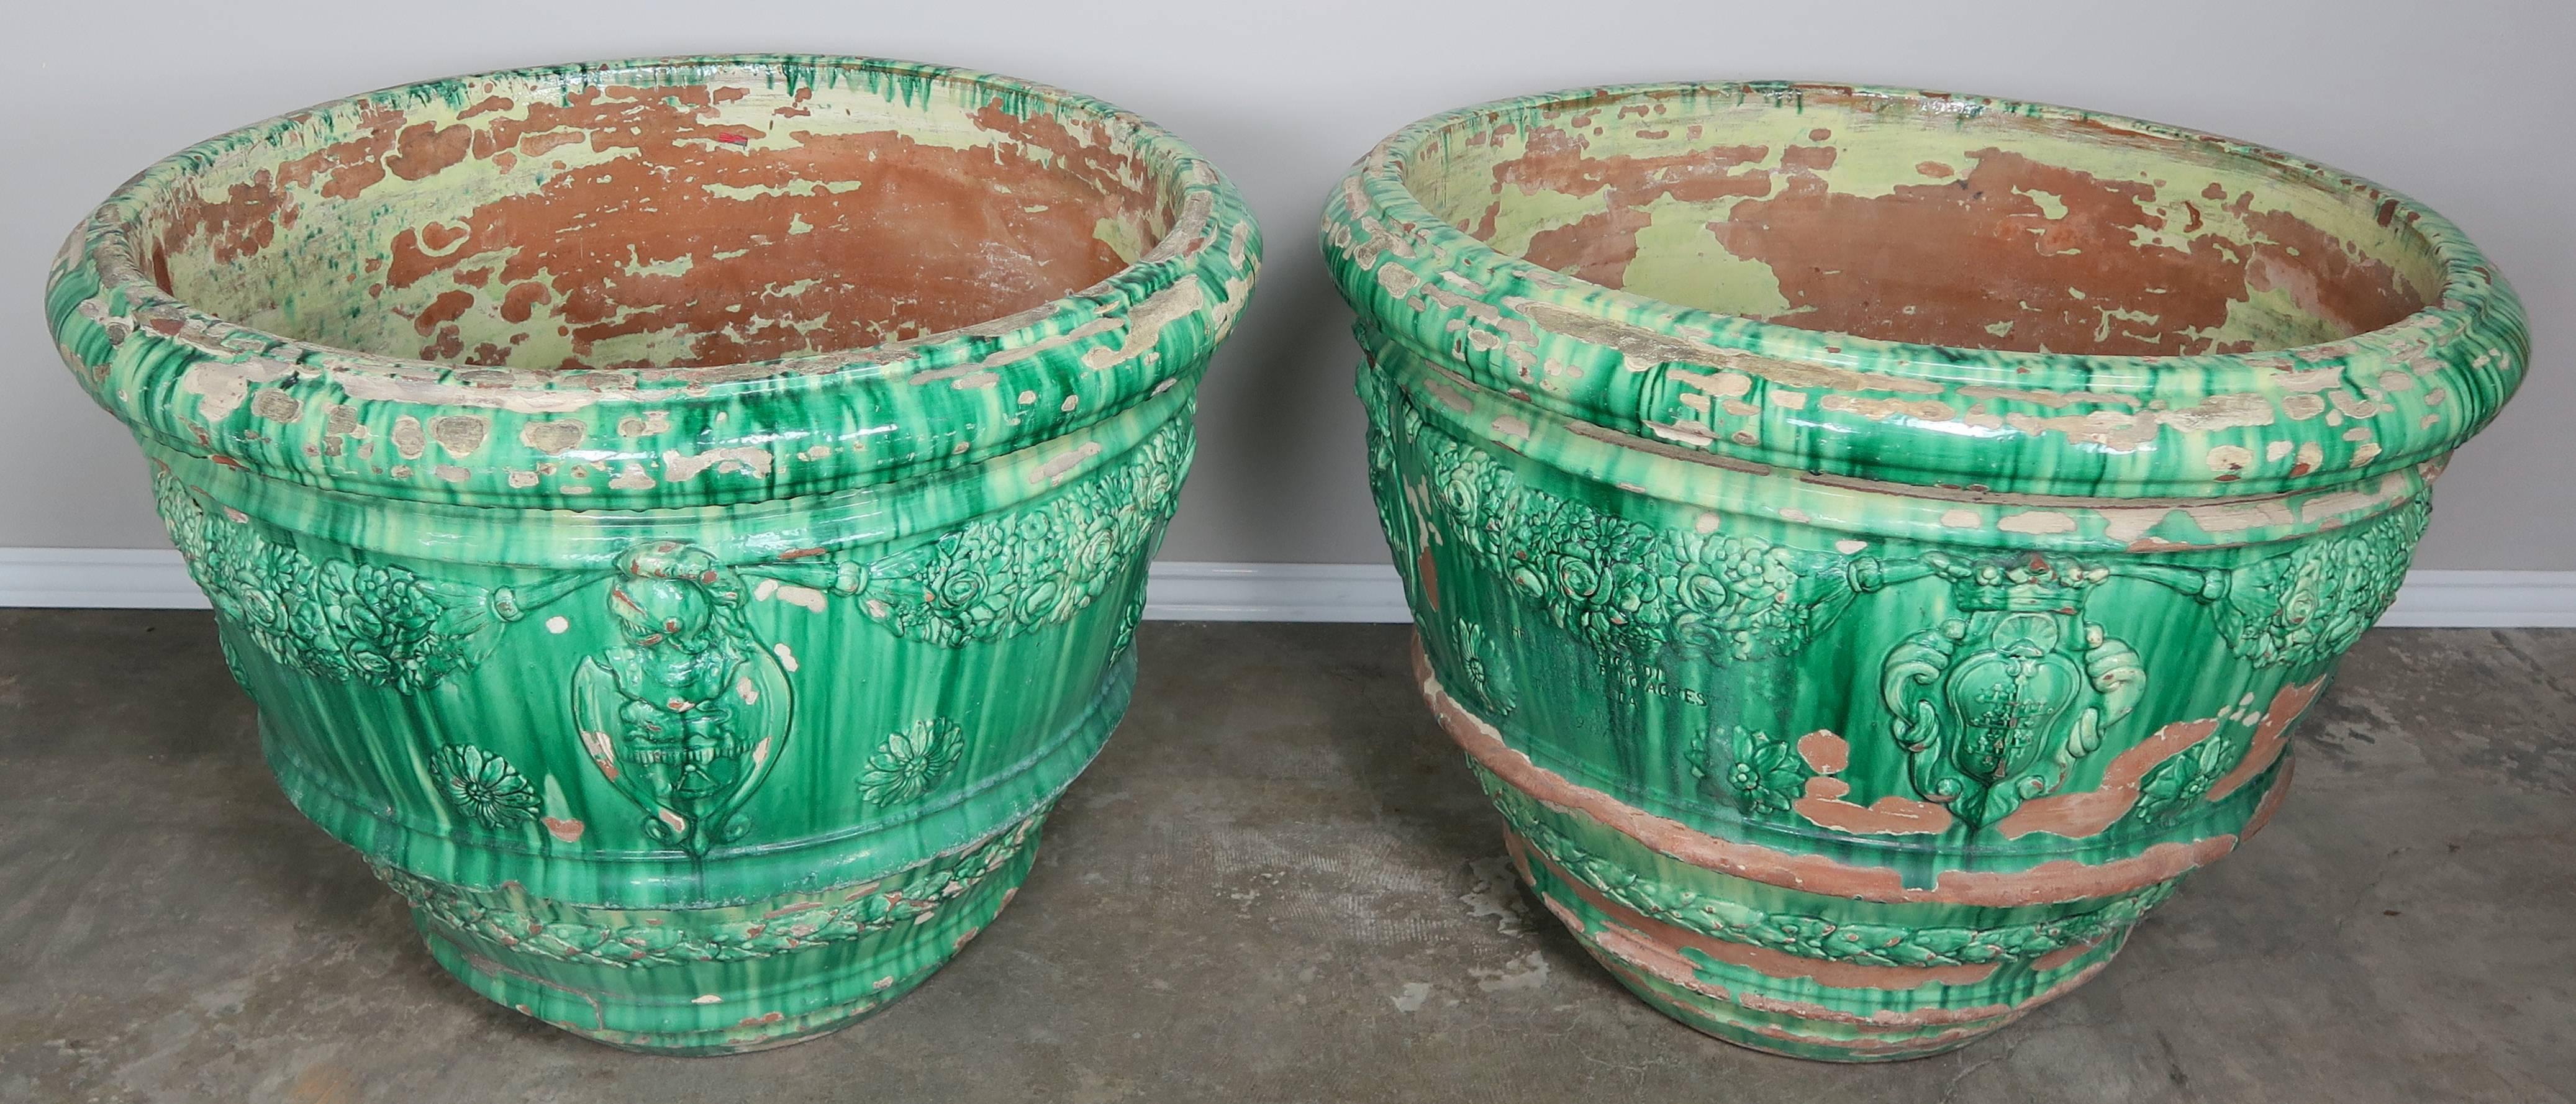 A pair of large green glazed Italian terra cotta planters with raised details depicting a Knight, crown and floral arrangements throughout. Smooth wide lip. Inscription denoting Firenze Italia.